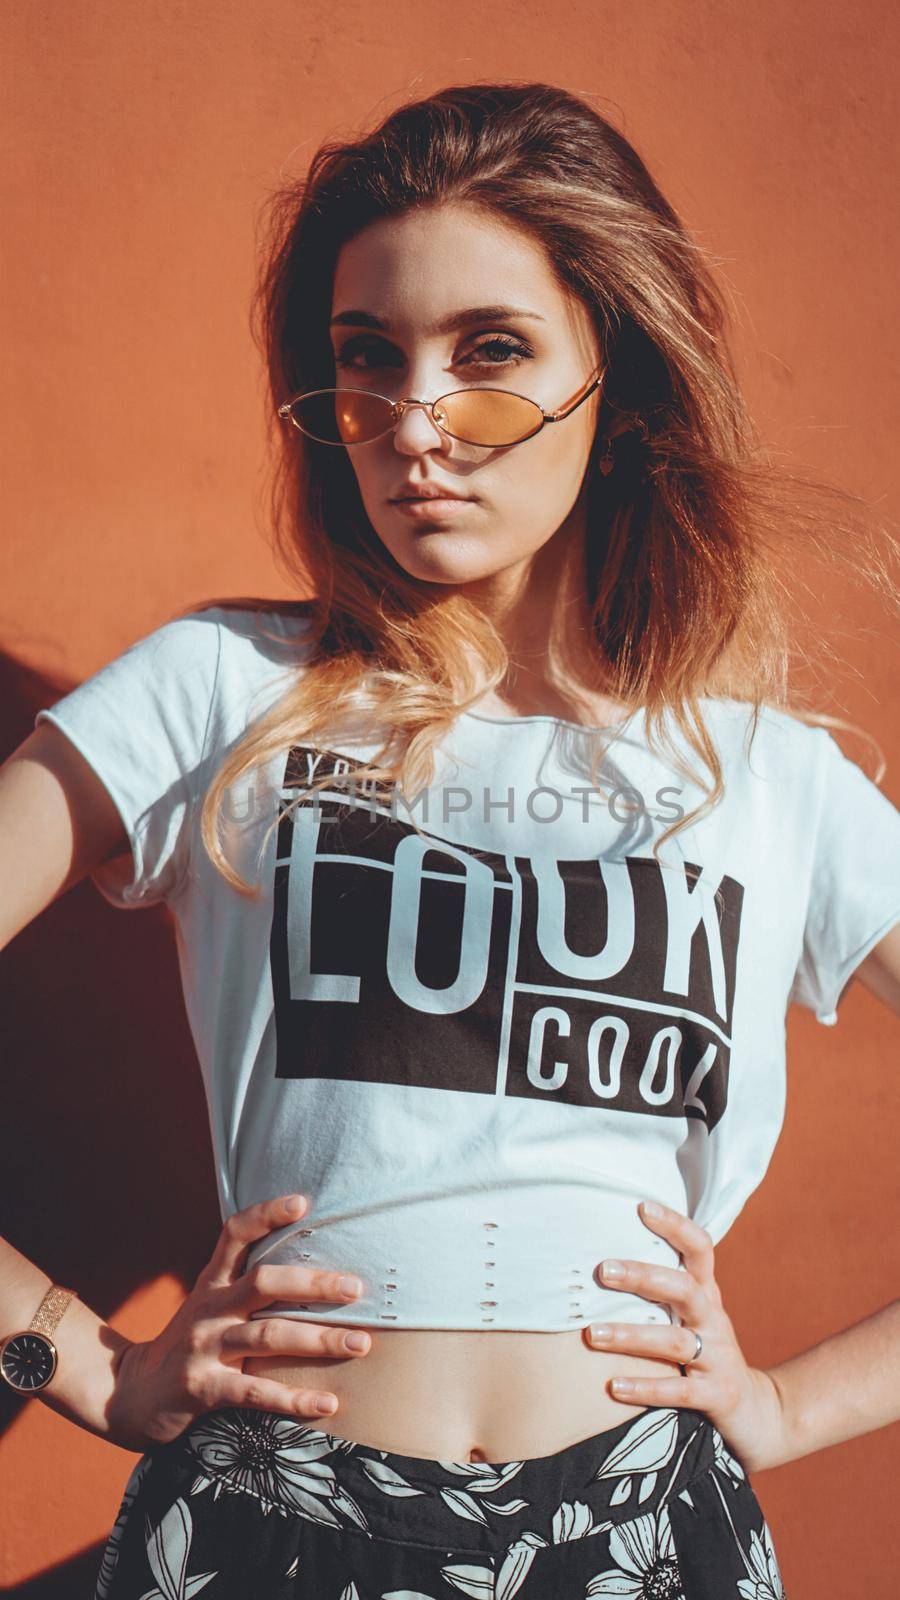 Fashion portrait stylish pretty woman in sunglasses posing in the city, street fashion. You look cool on white t-shirt